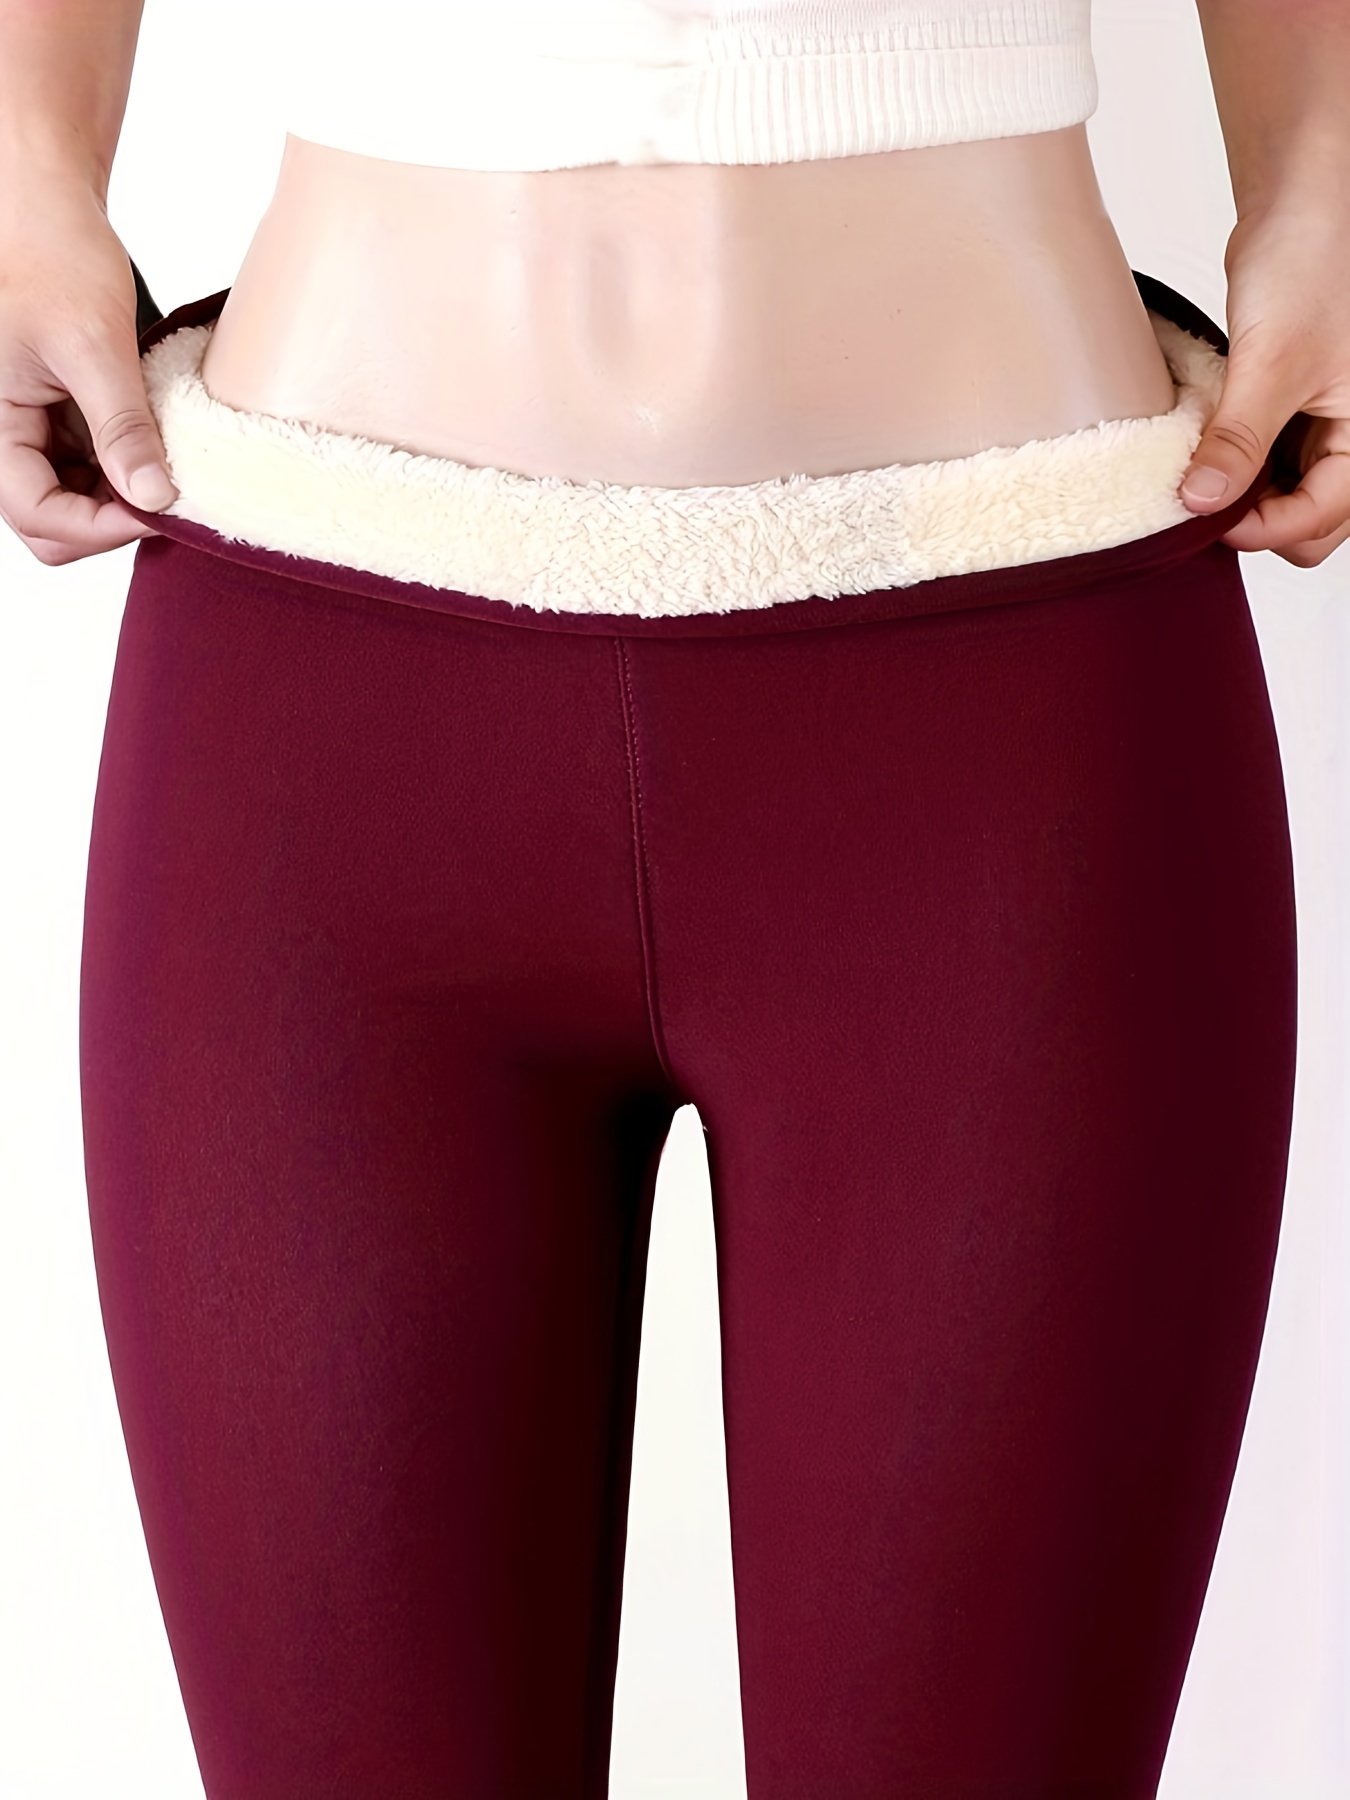 Womens 24 Fleece Lined Leggings Petite High Waisted Thermal Winter Pants  Yoga Running Tights Pockets Wine Red S